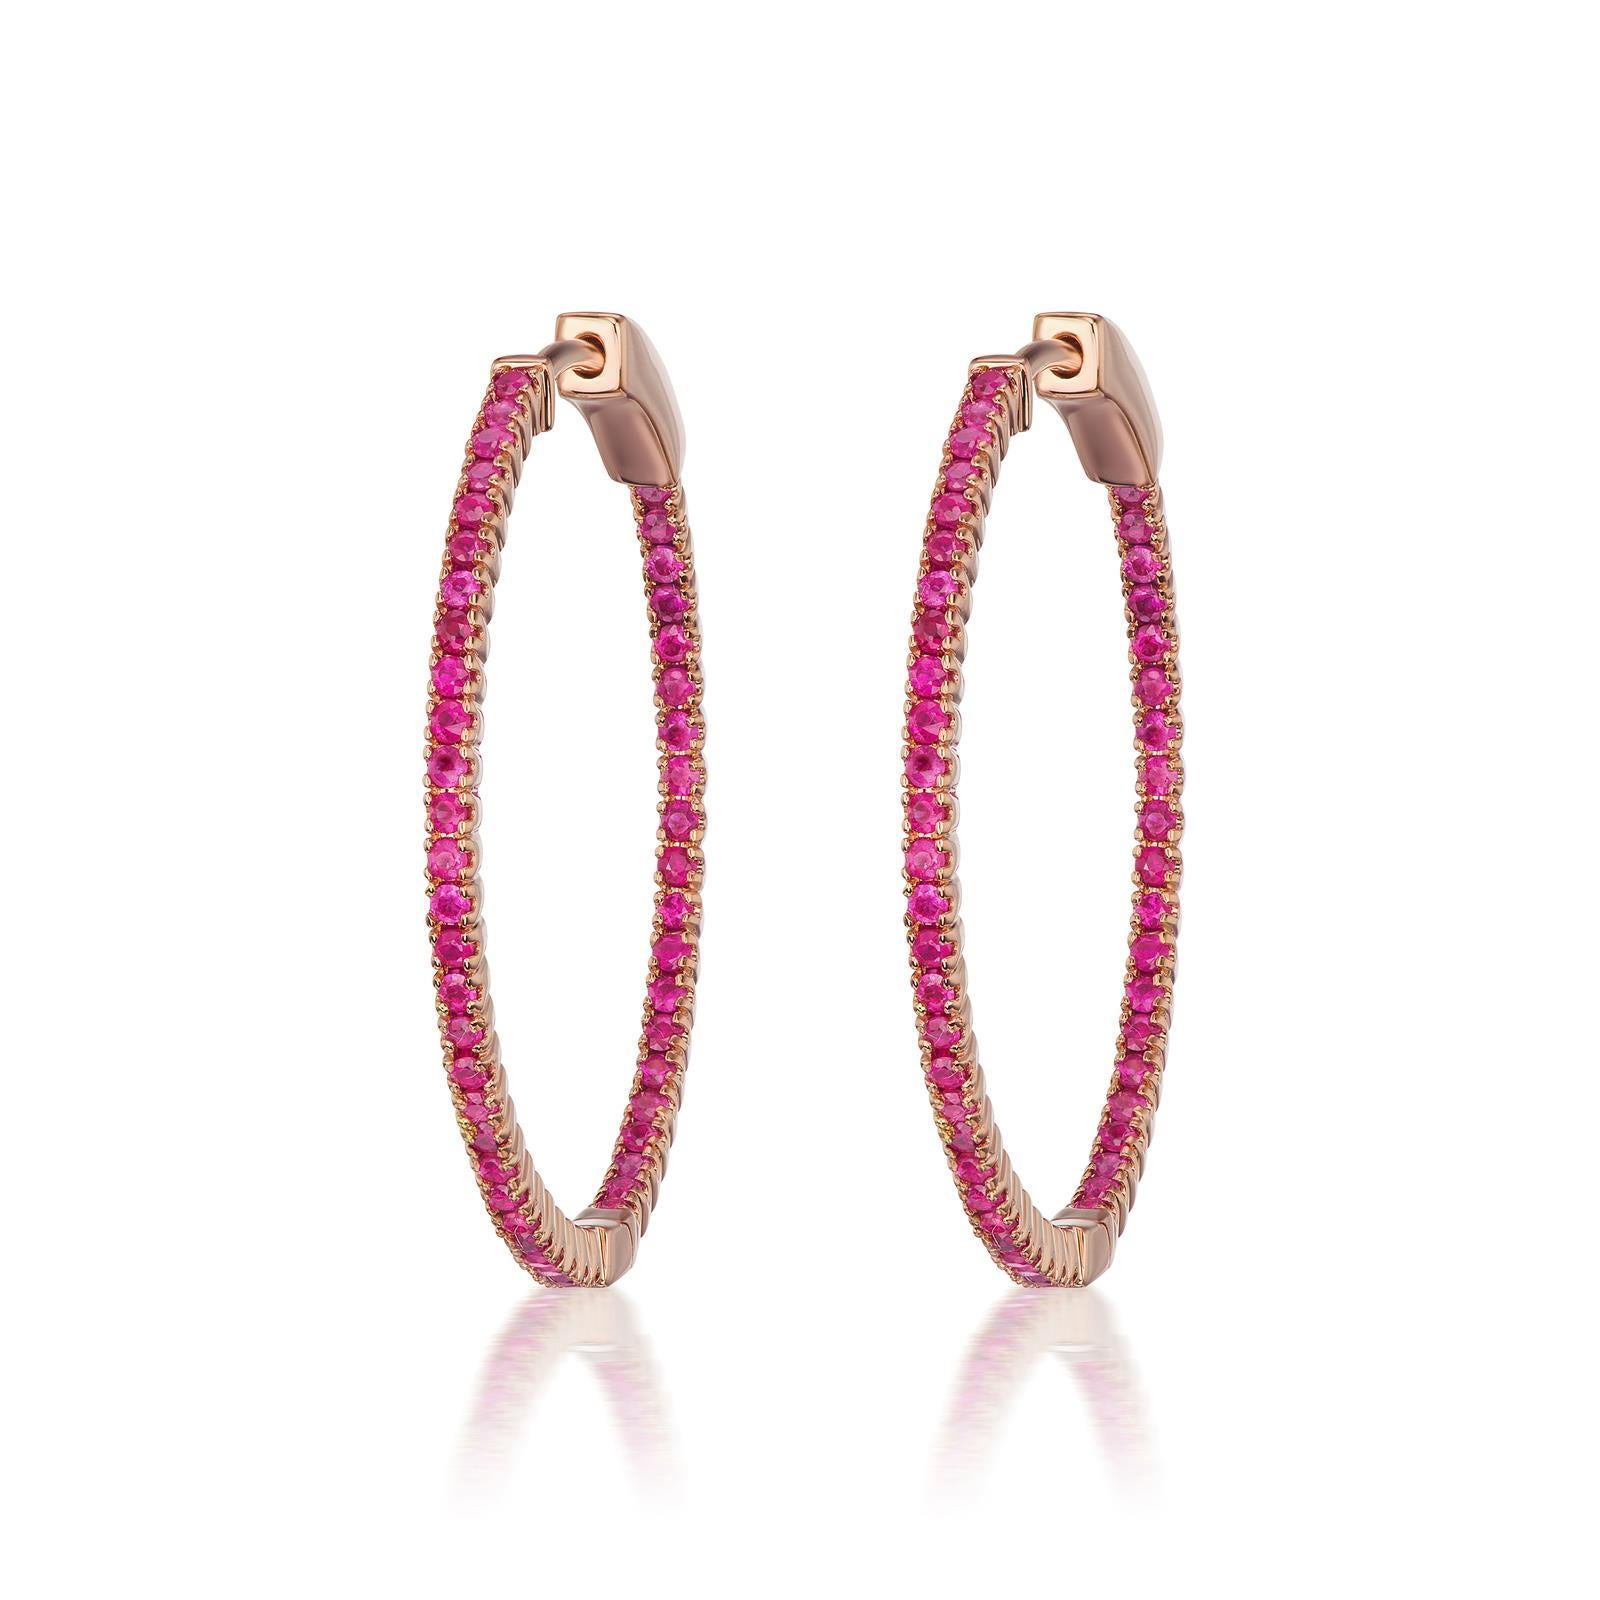 These Gemistry hoop earrings have the distinctive red glimmer of the Ruby. Gleaming from the inside and outside, 0.96 Ct. t.w. ruby rounds illuminate the polished 18k rose gold hoops.
Hanging length is 1”.
Please follow the Luxury Jewels storefront